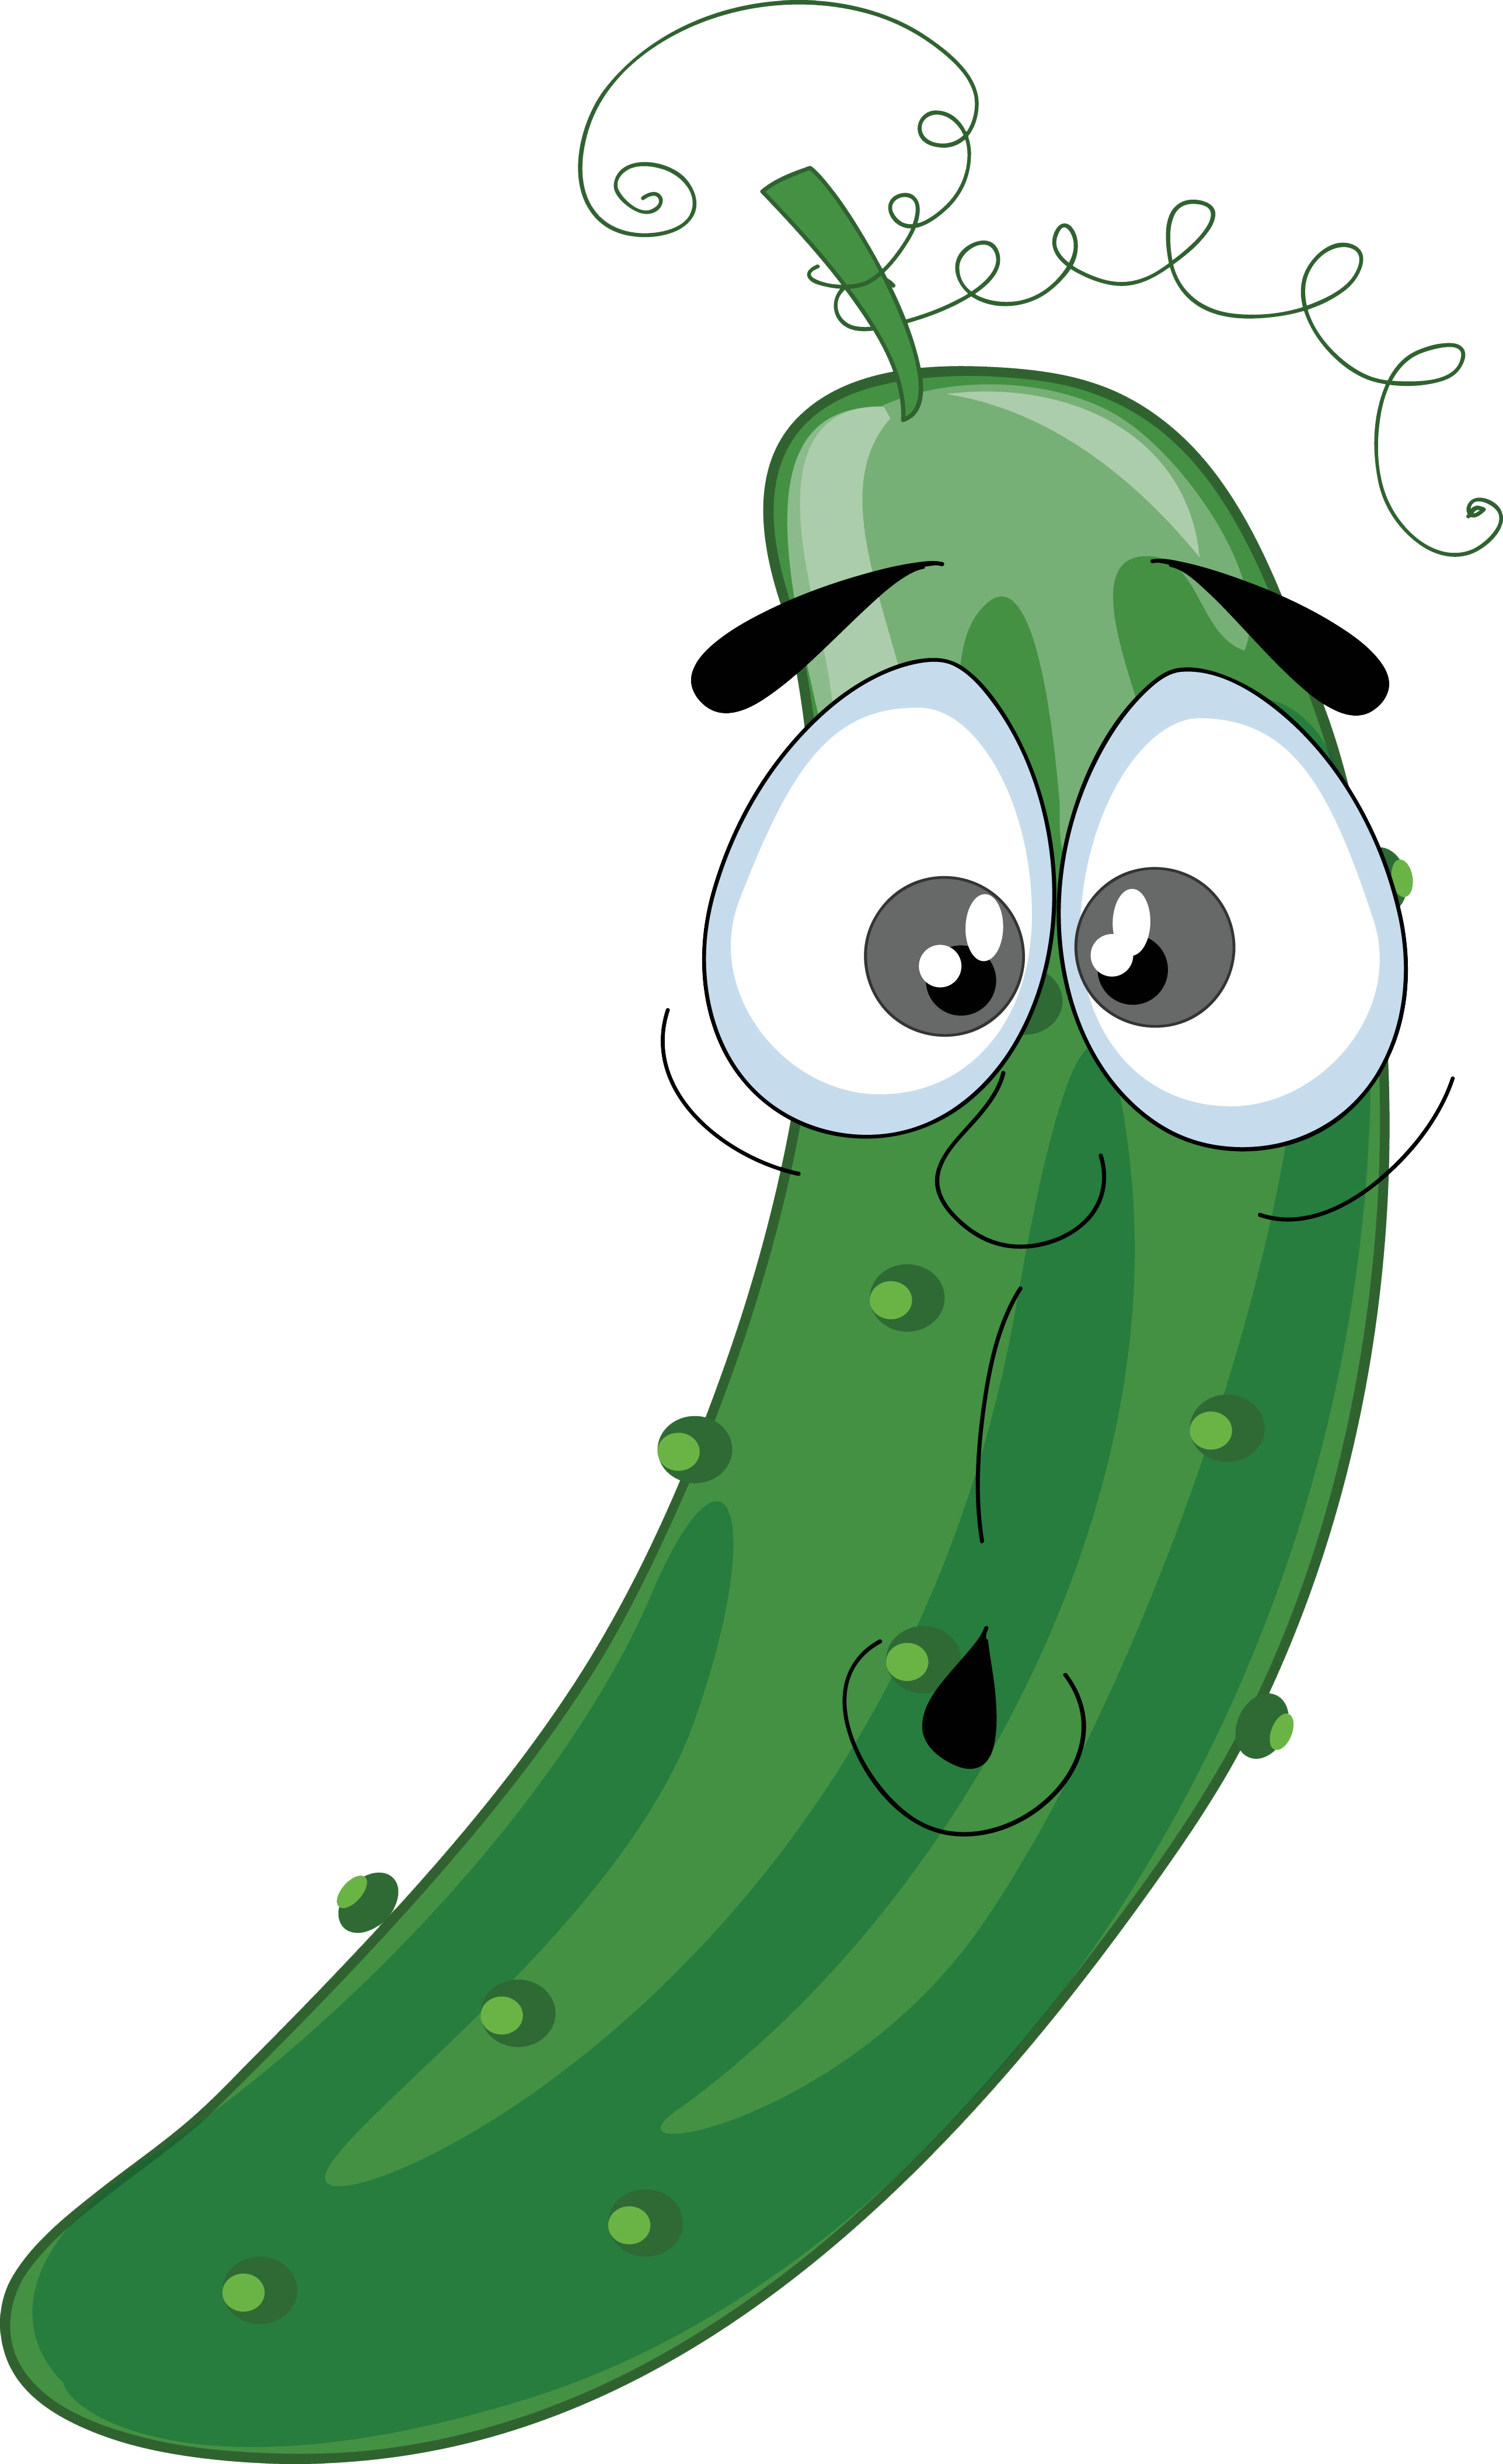 01 - Vegetables Gif Png (2575x4221)